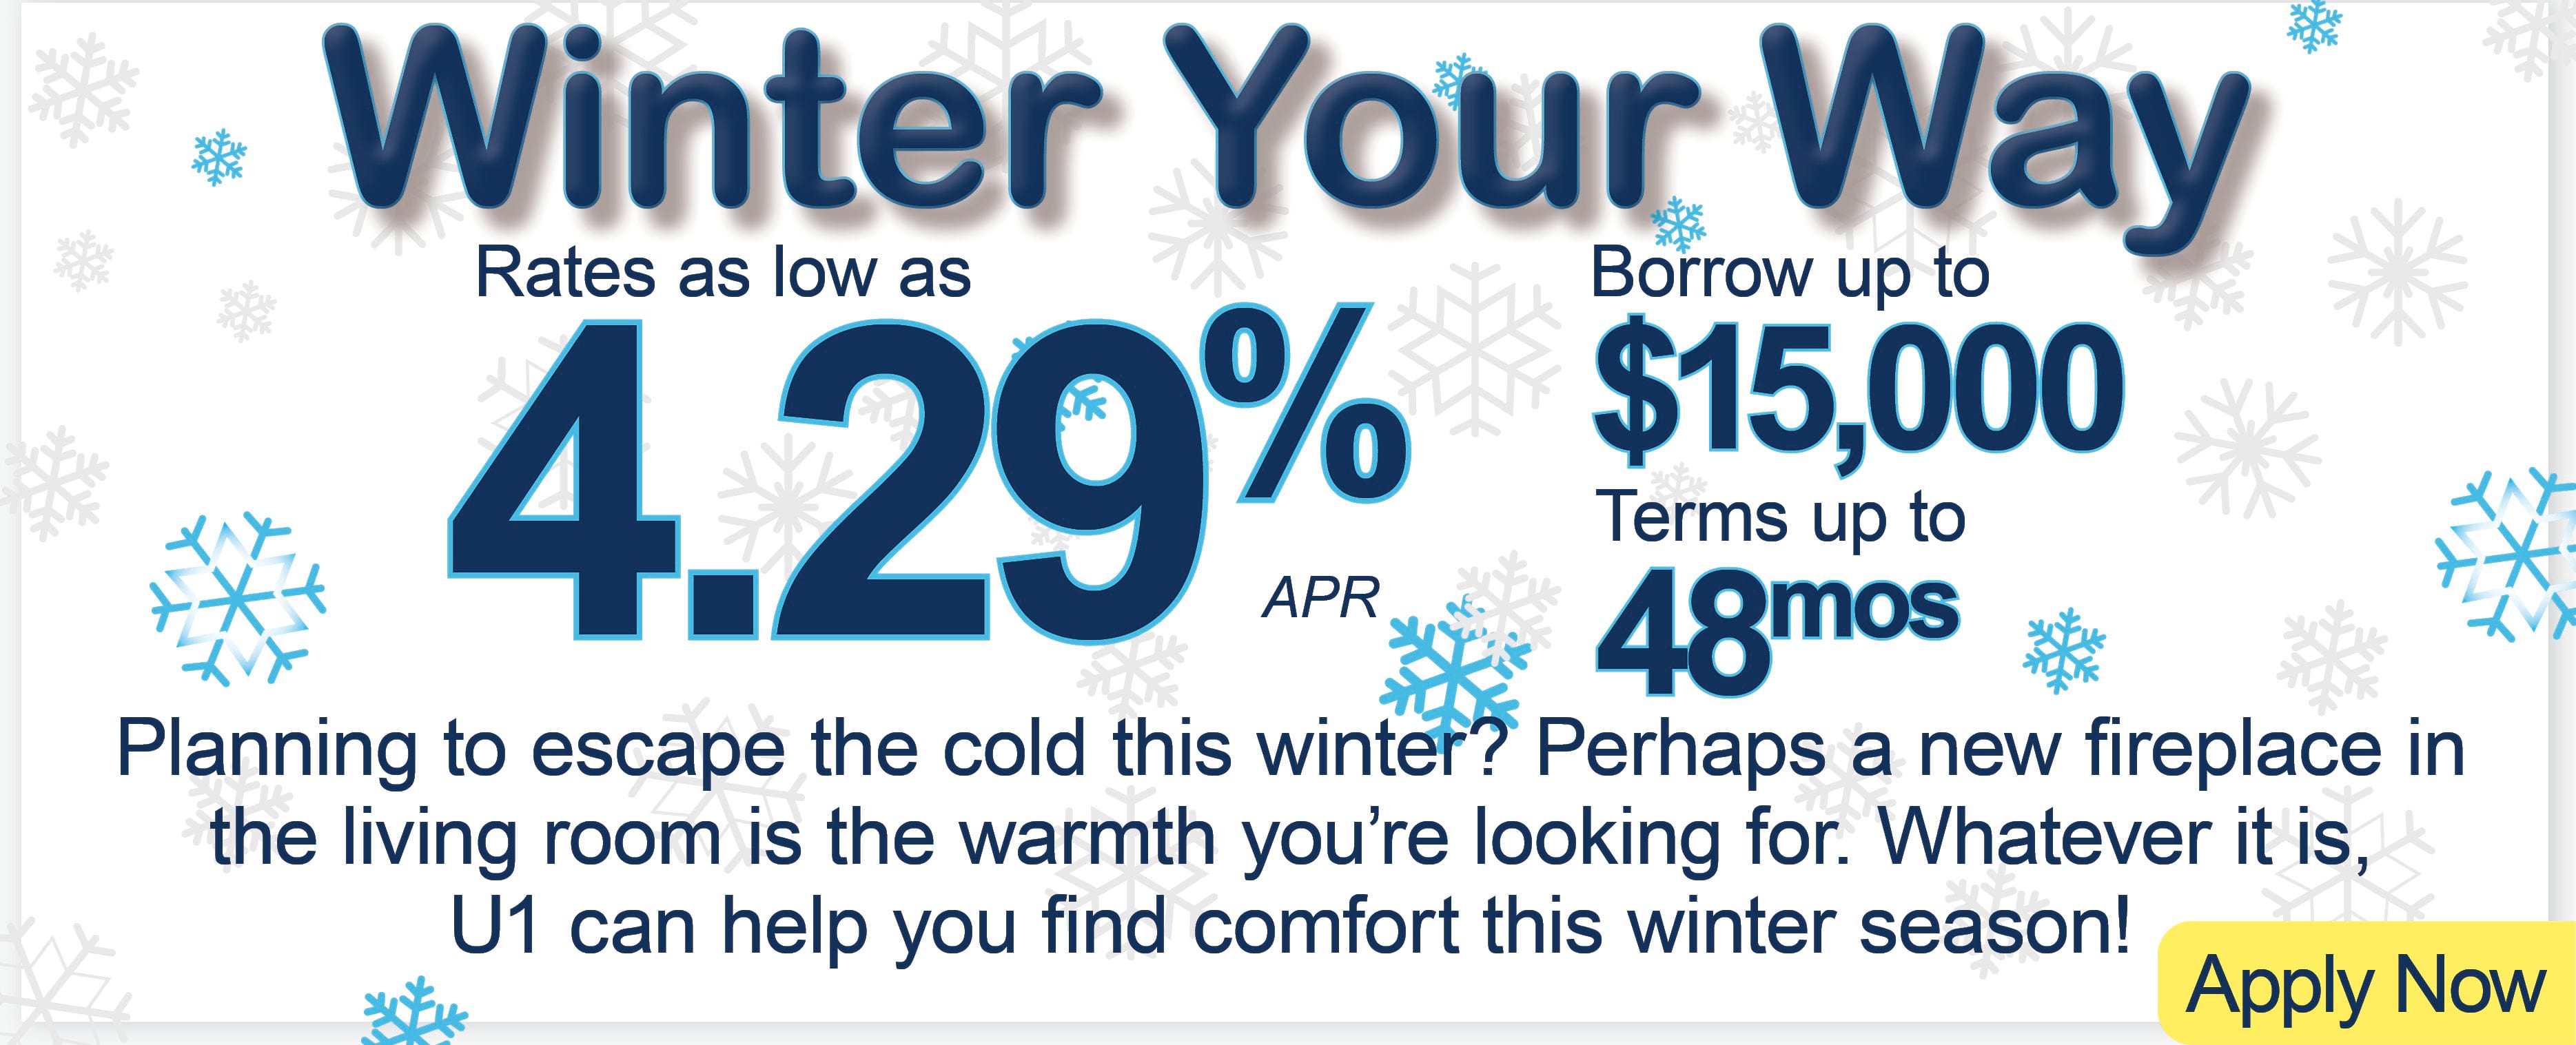 Winter Your Way Loan. Rates as low as 4.29%